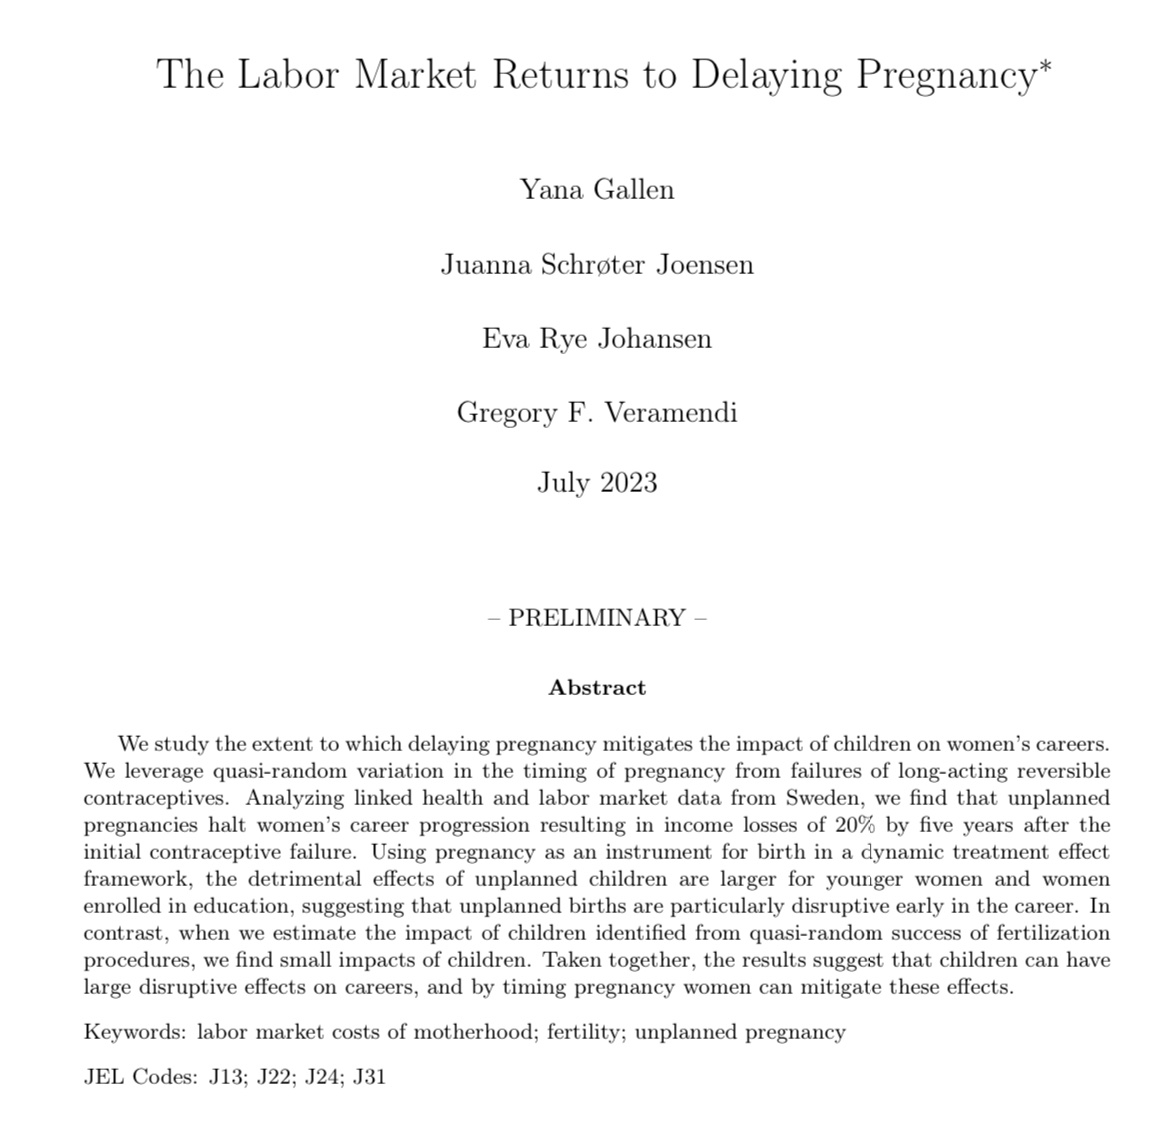 What happens to women’s careers as a result of an unplanned pregnancy? Does the impact depend on career progression? Find out in a few hours when I present at NBER: nber.org/conferences/si… with amazing coauthors @gregveramendi Juanna Joensen and @EvaRye